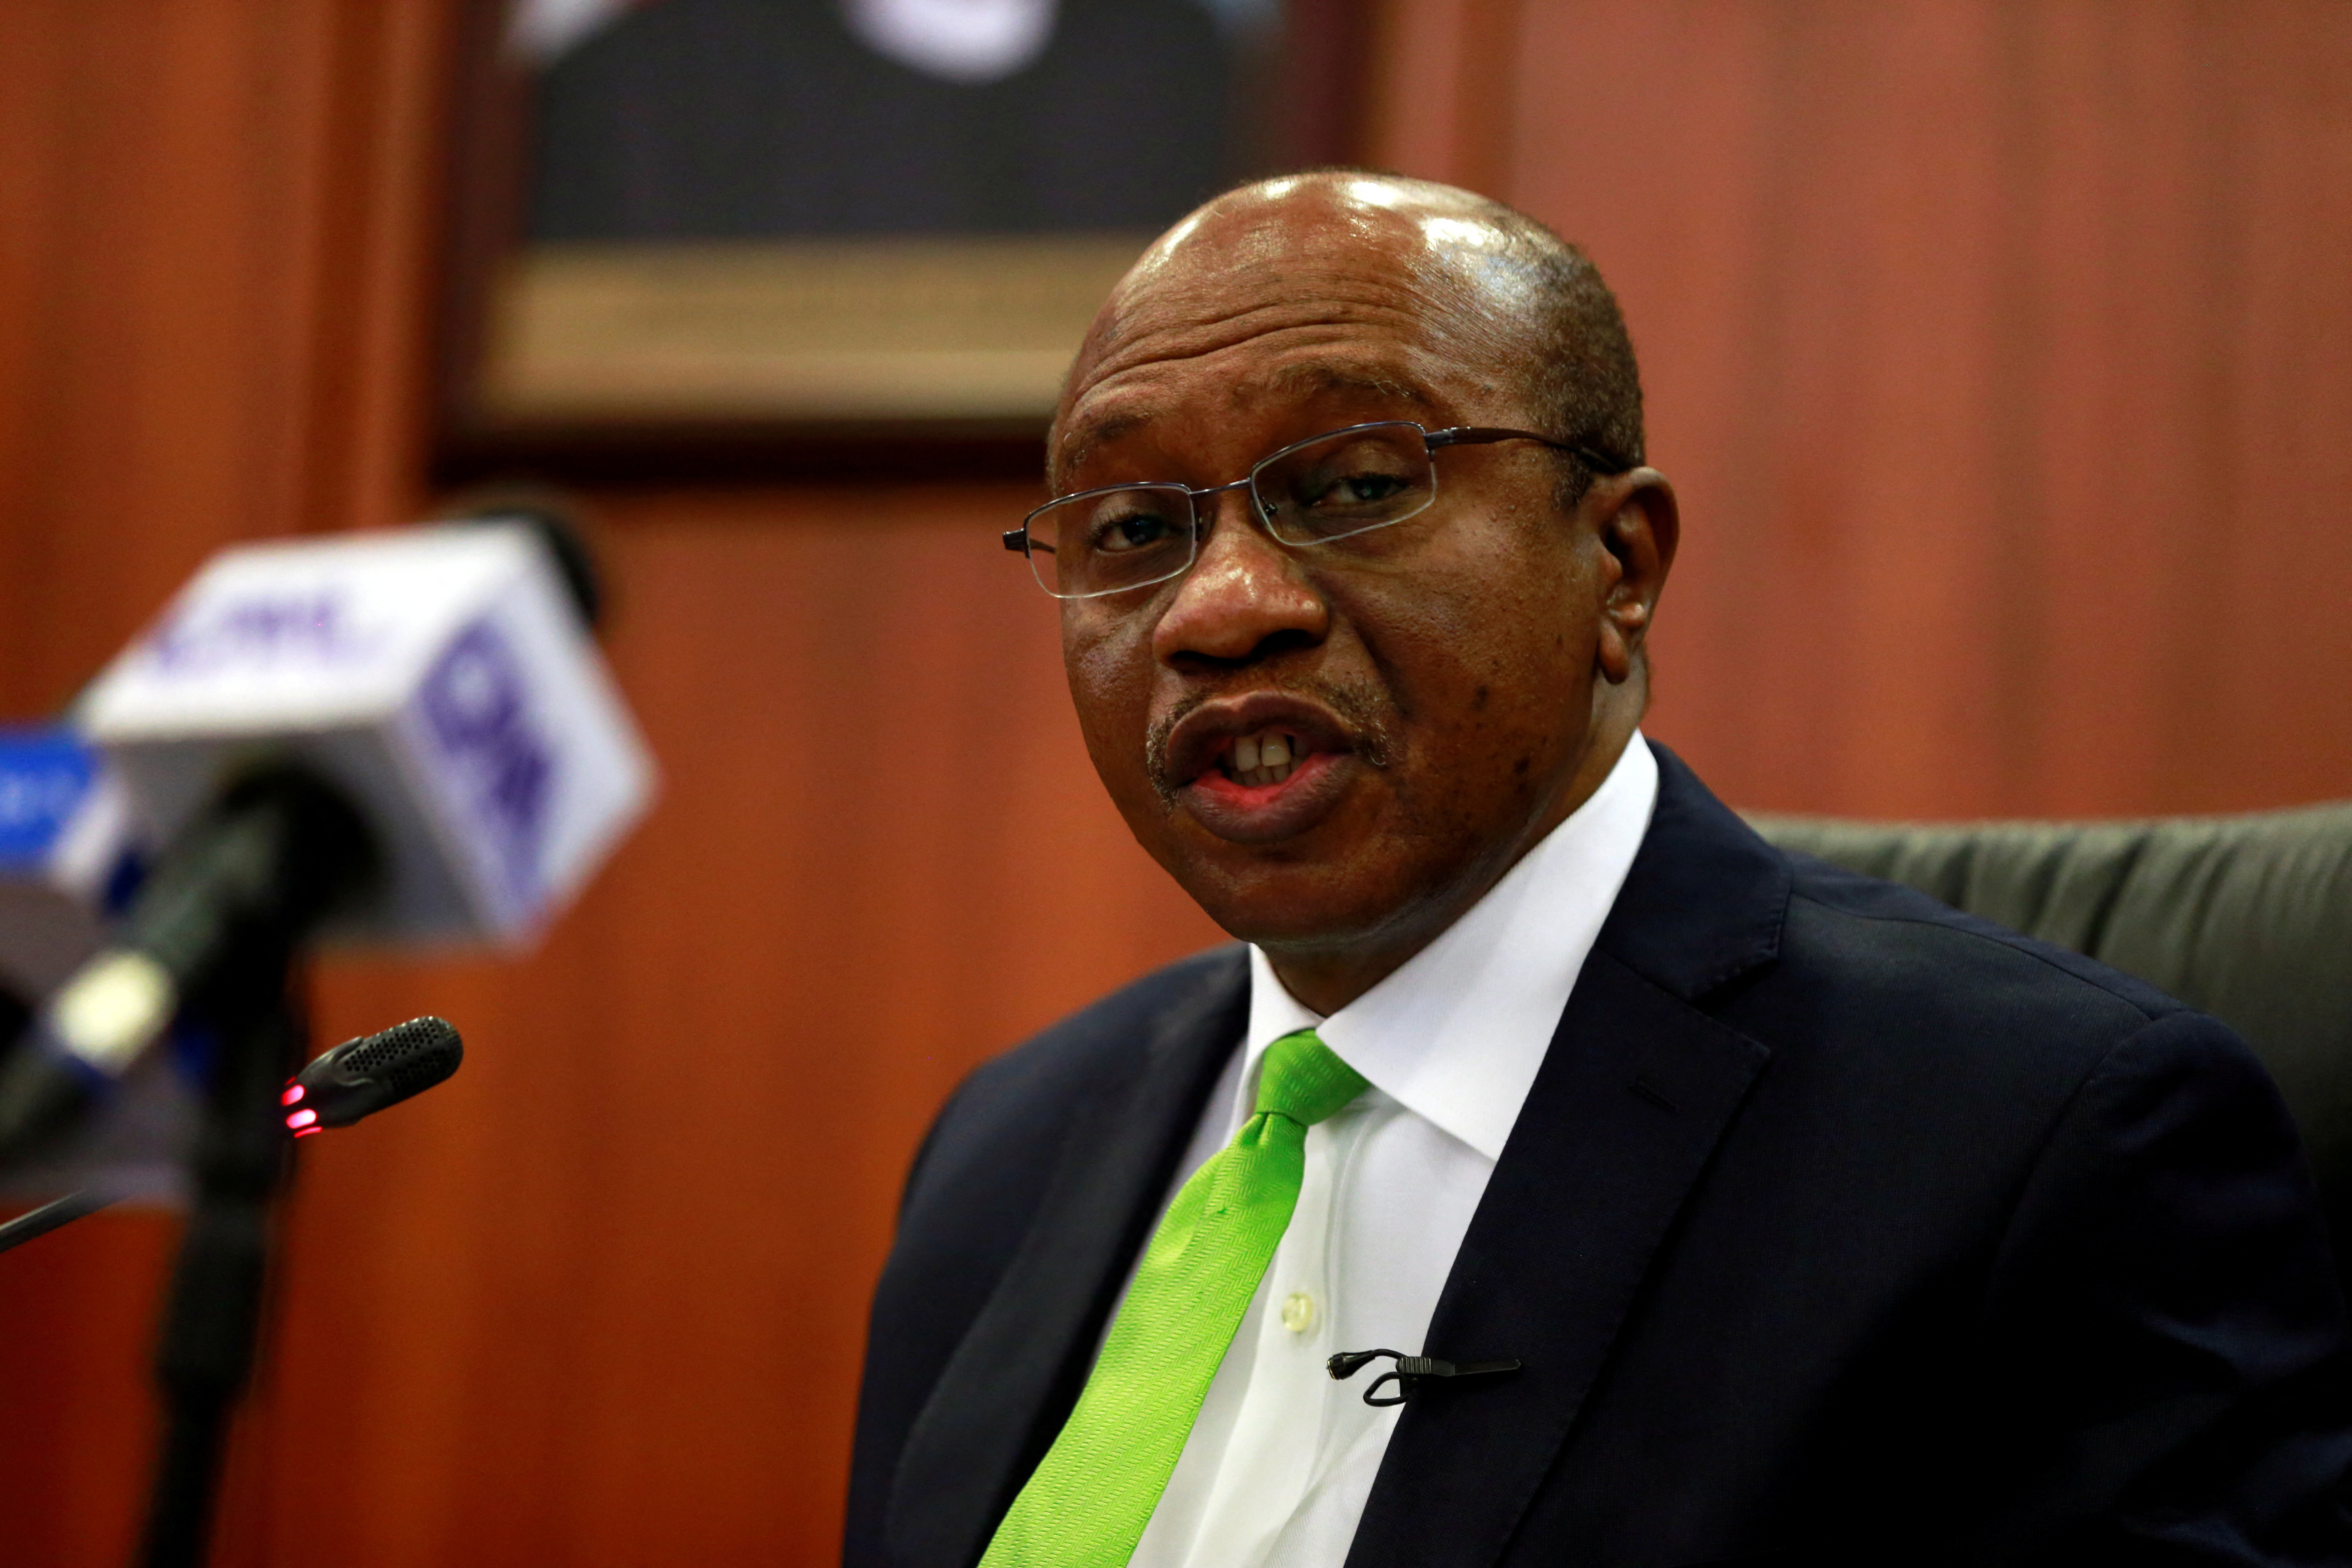 Nigeria's Central Bank Governor Godwin Emefiele briefis the media during the MPC meeting in Abuja